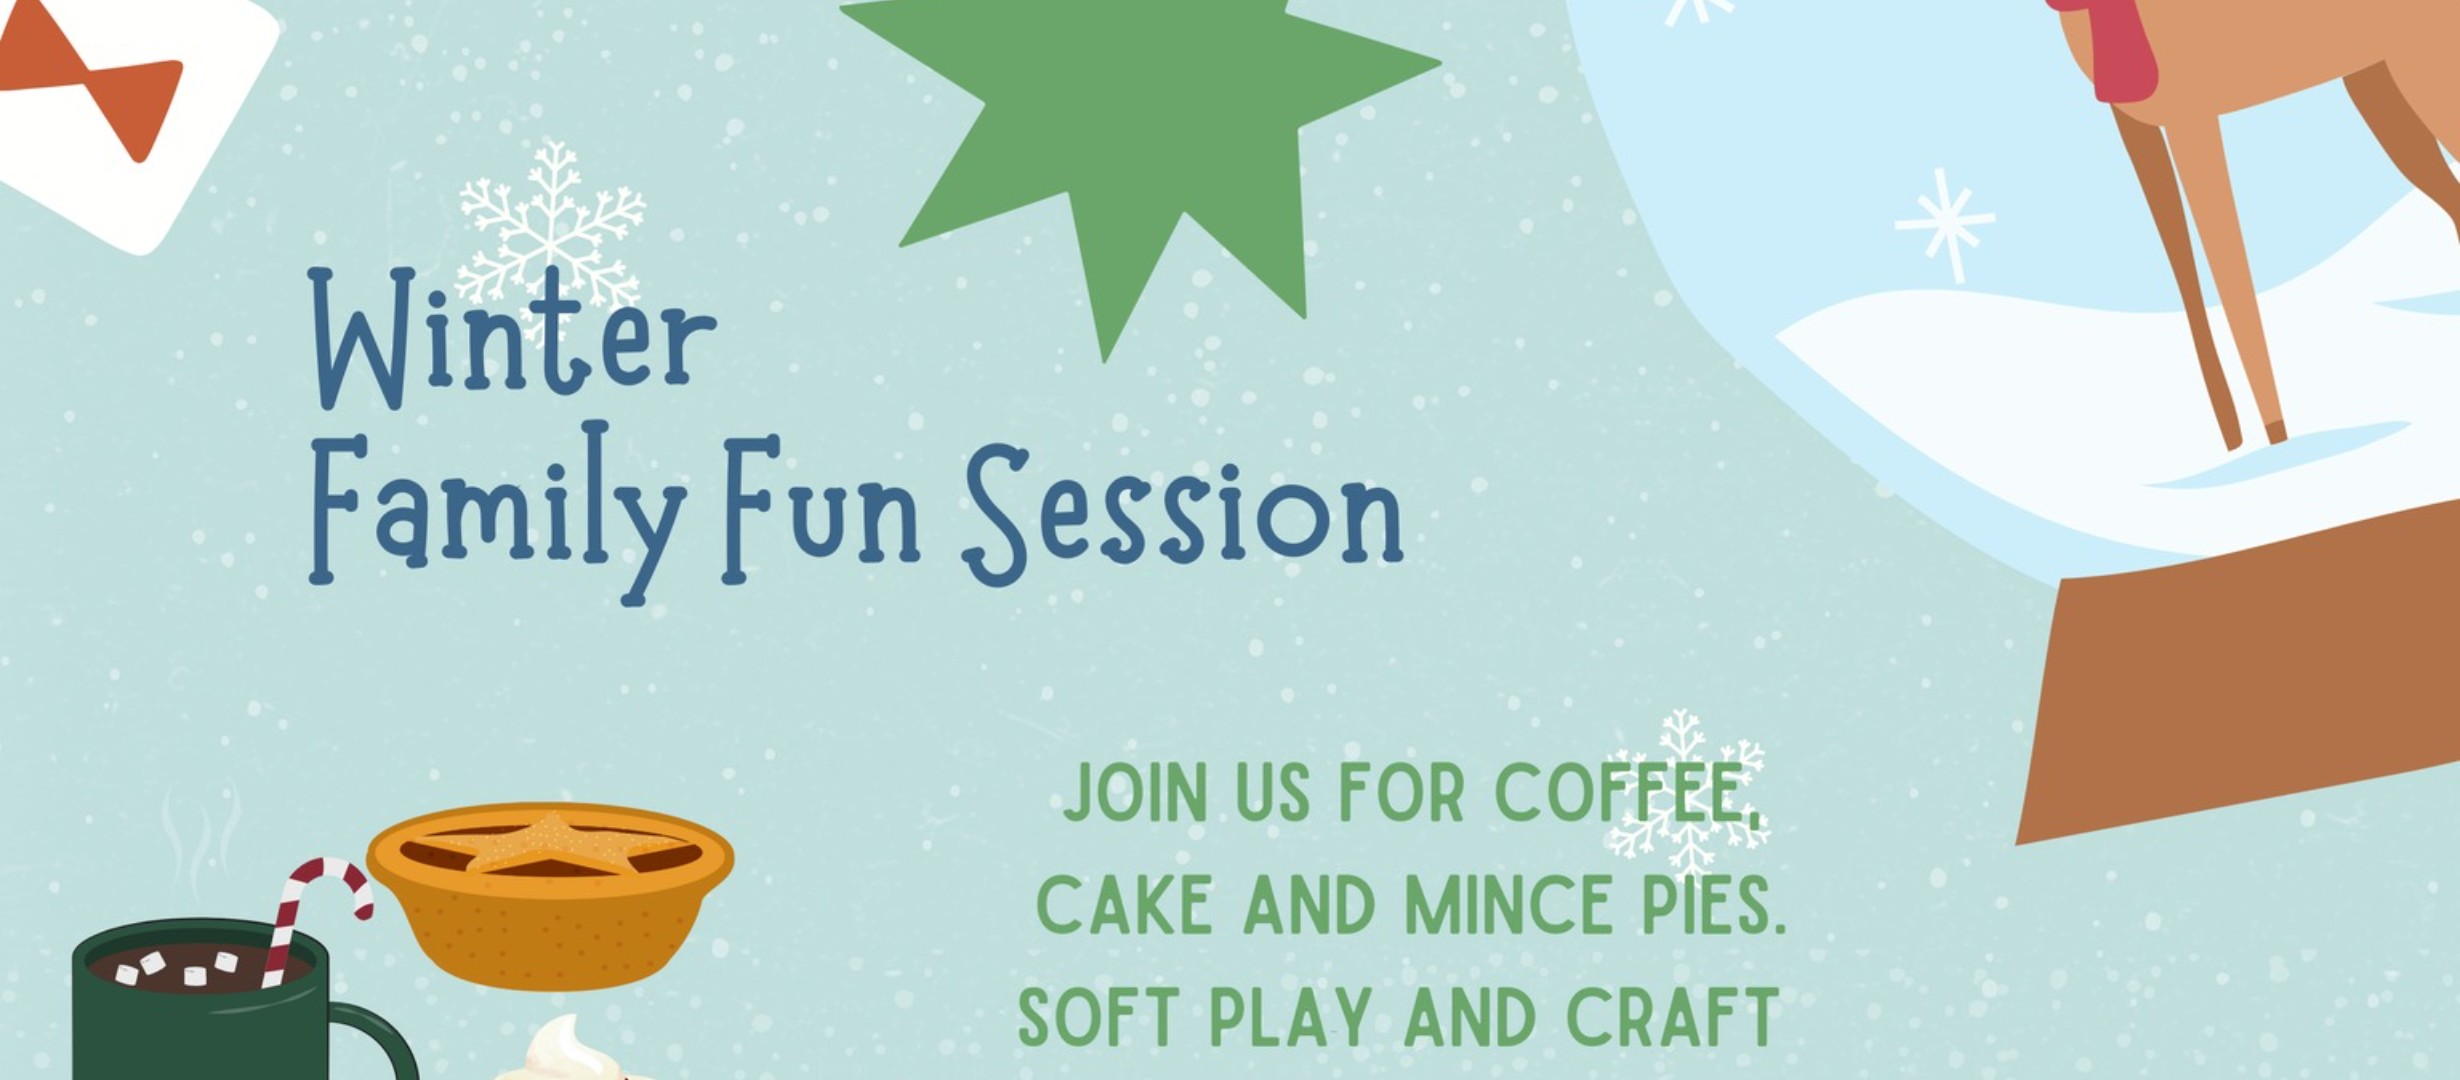 text reads 'Winter Family Fun Session - Join us for Coffee, Cake and mince pies, soft play and craft. Christmas background images.